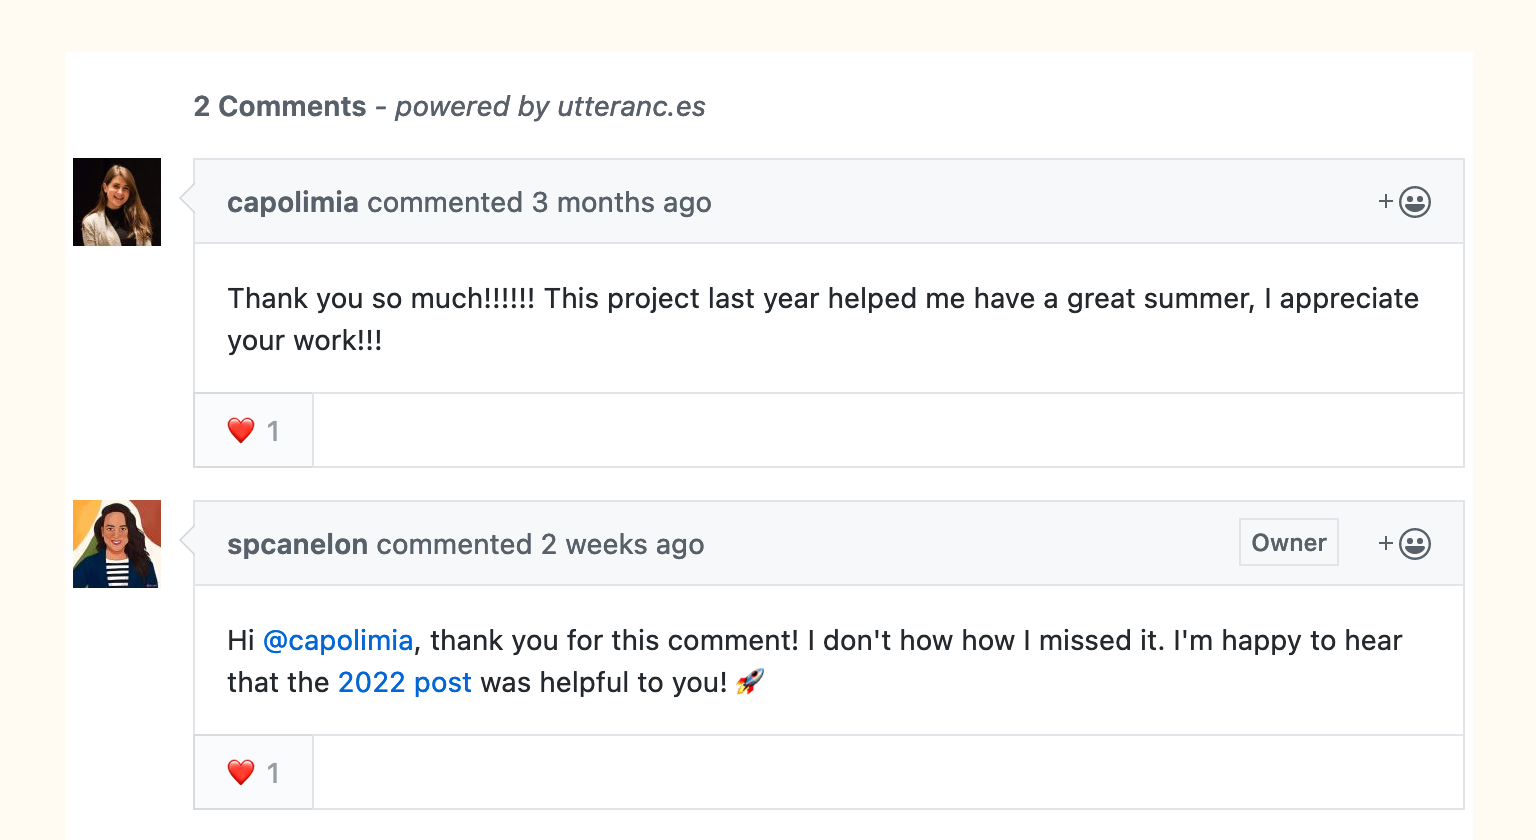 User @capolimia says 'Thank you so much!!!!!! This project last year helped me have a great summer, I appreciate your work!!!' and I respond 'Hi @capolimia, thank you for this comment! I don't how how I missed it. I'm happy to hear that the 2022 post was helpful to you! 🚀'